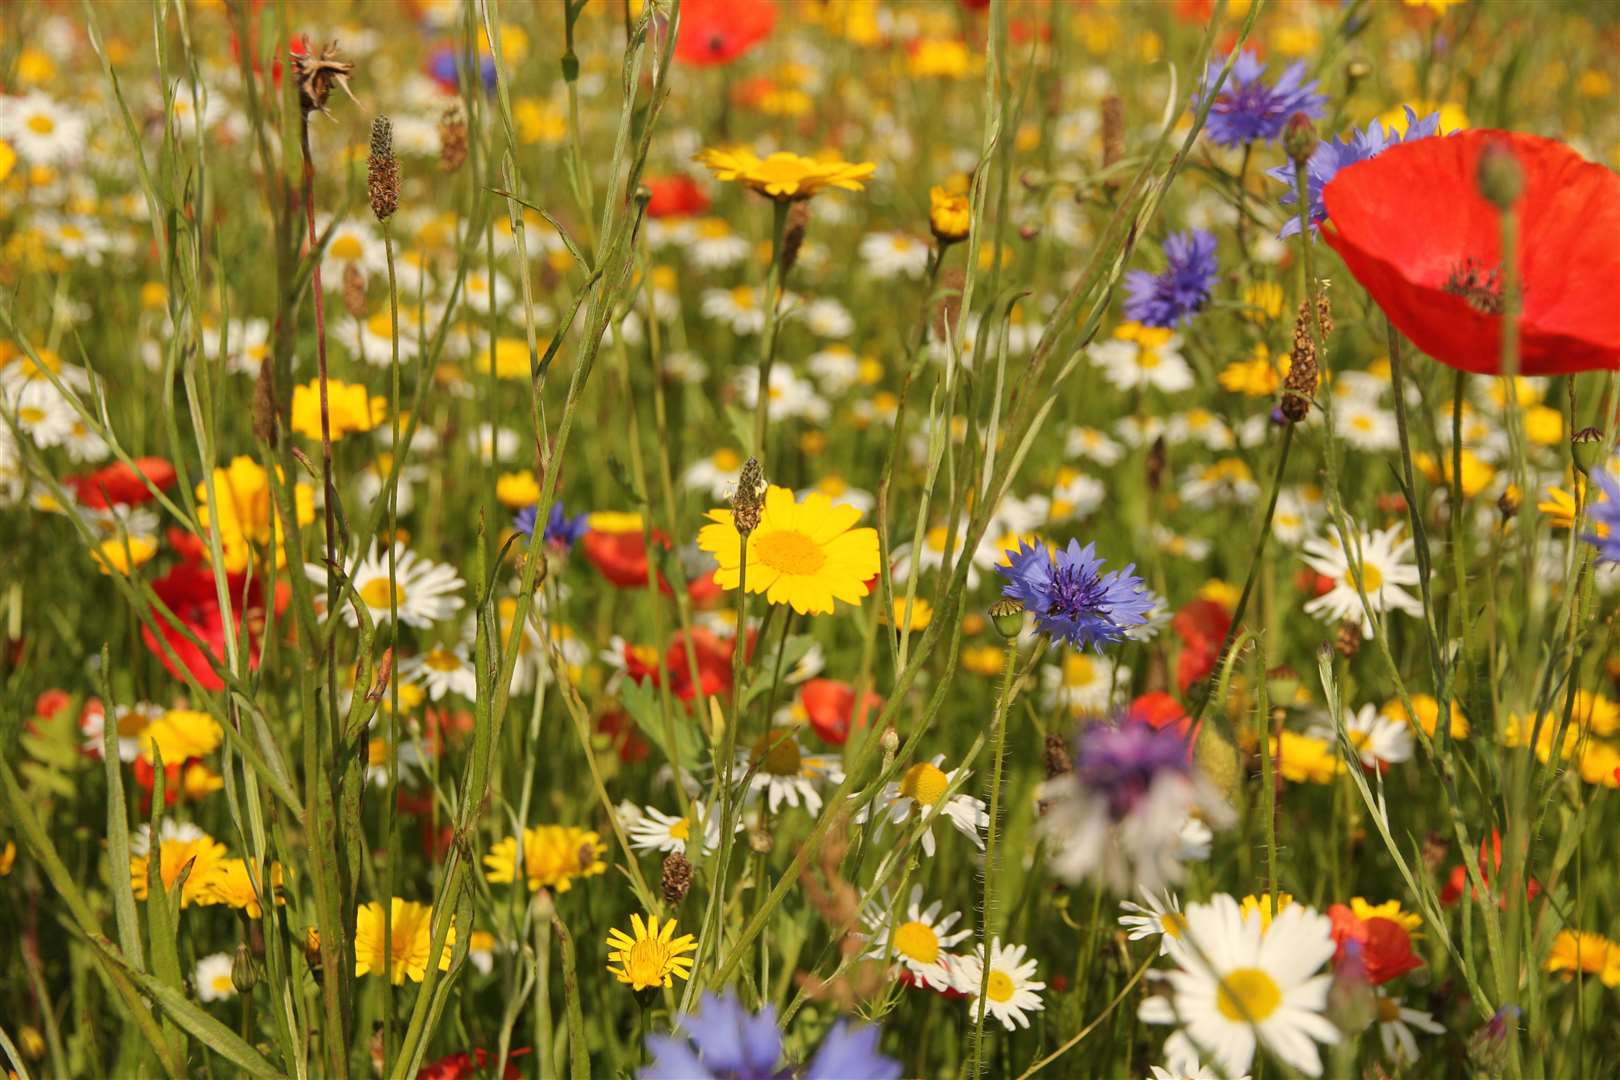 Close up of wild British flowers in field of grass including poppy, cornflower and daisy blooms